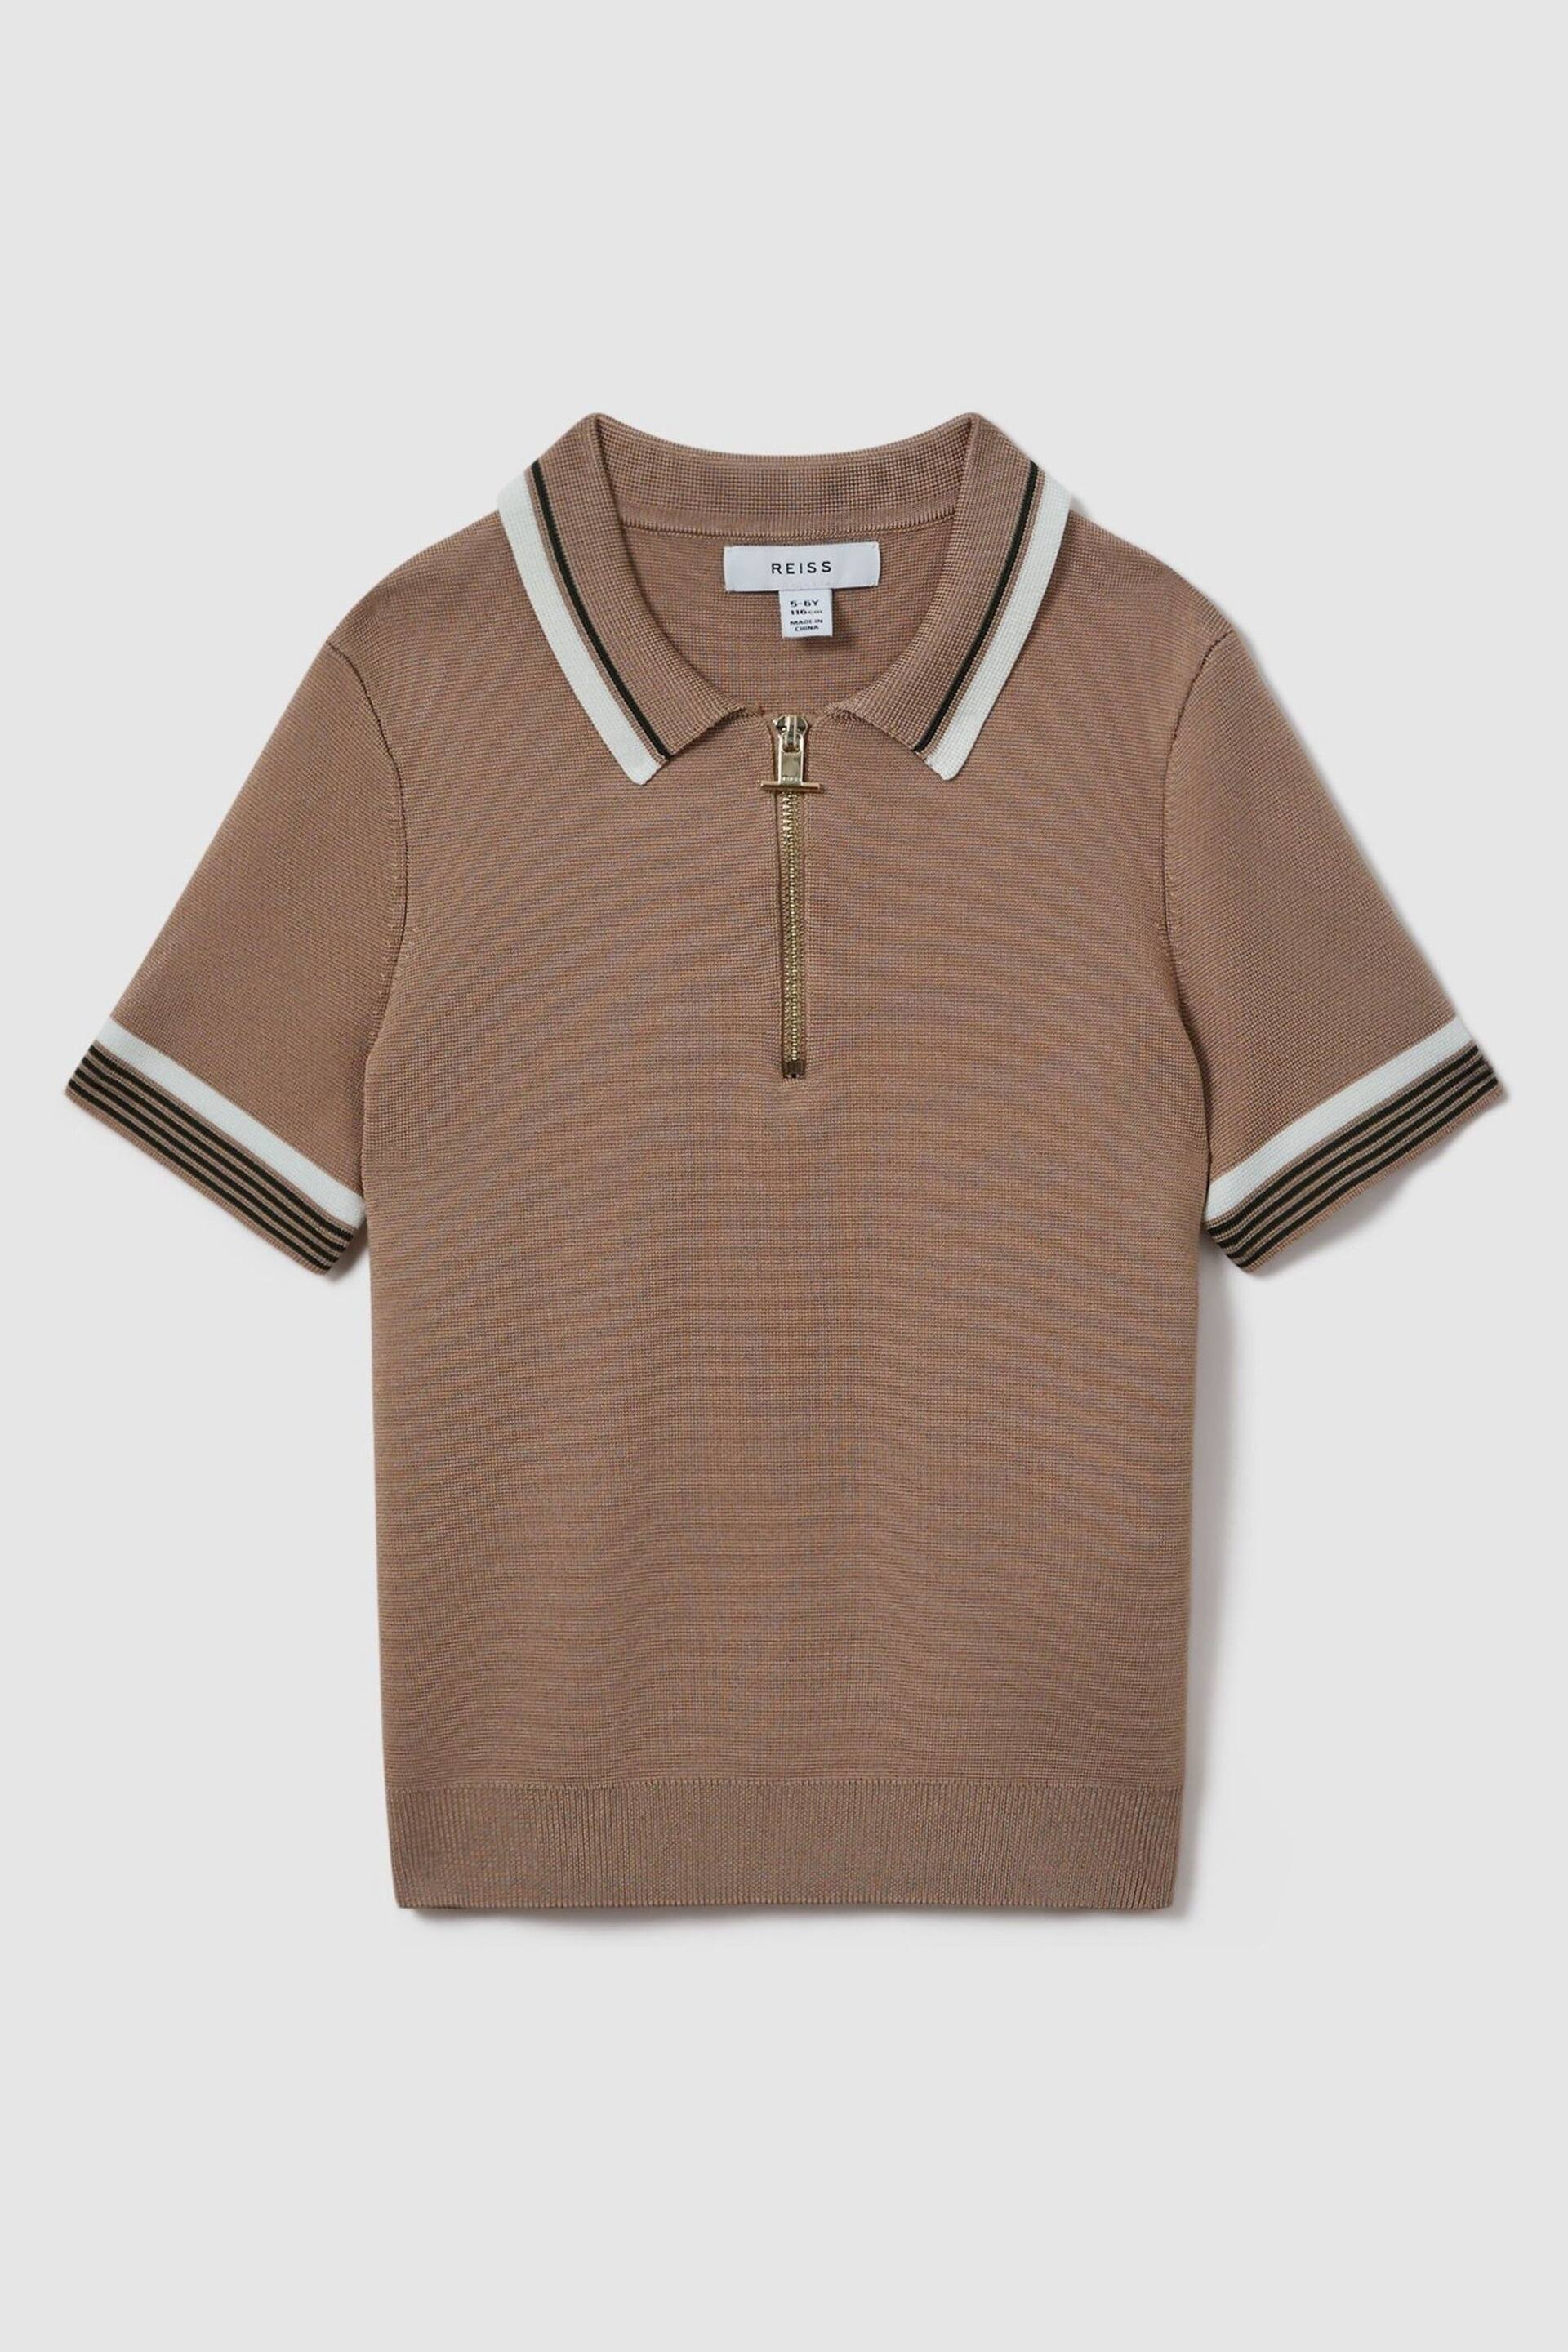 Reiss Warm Taupe Chelsea Junior Half-Zip Polo Shirt - Image 1 of 3